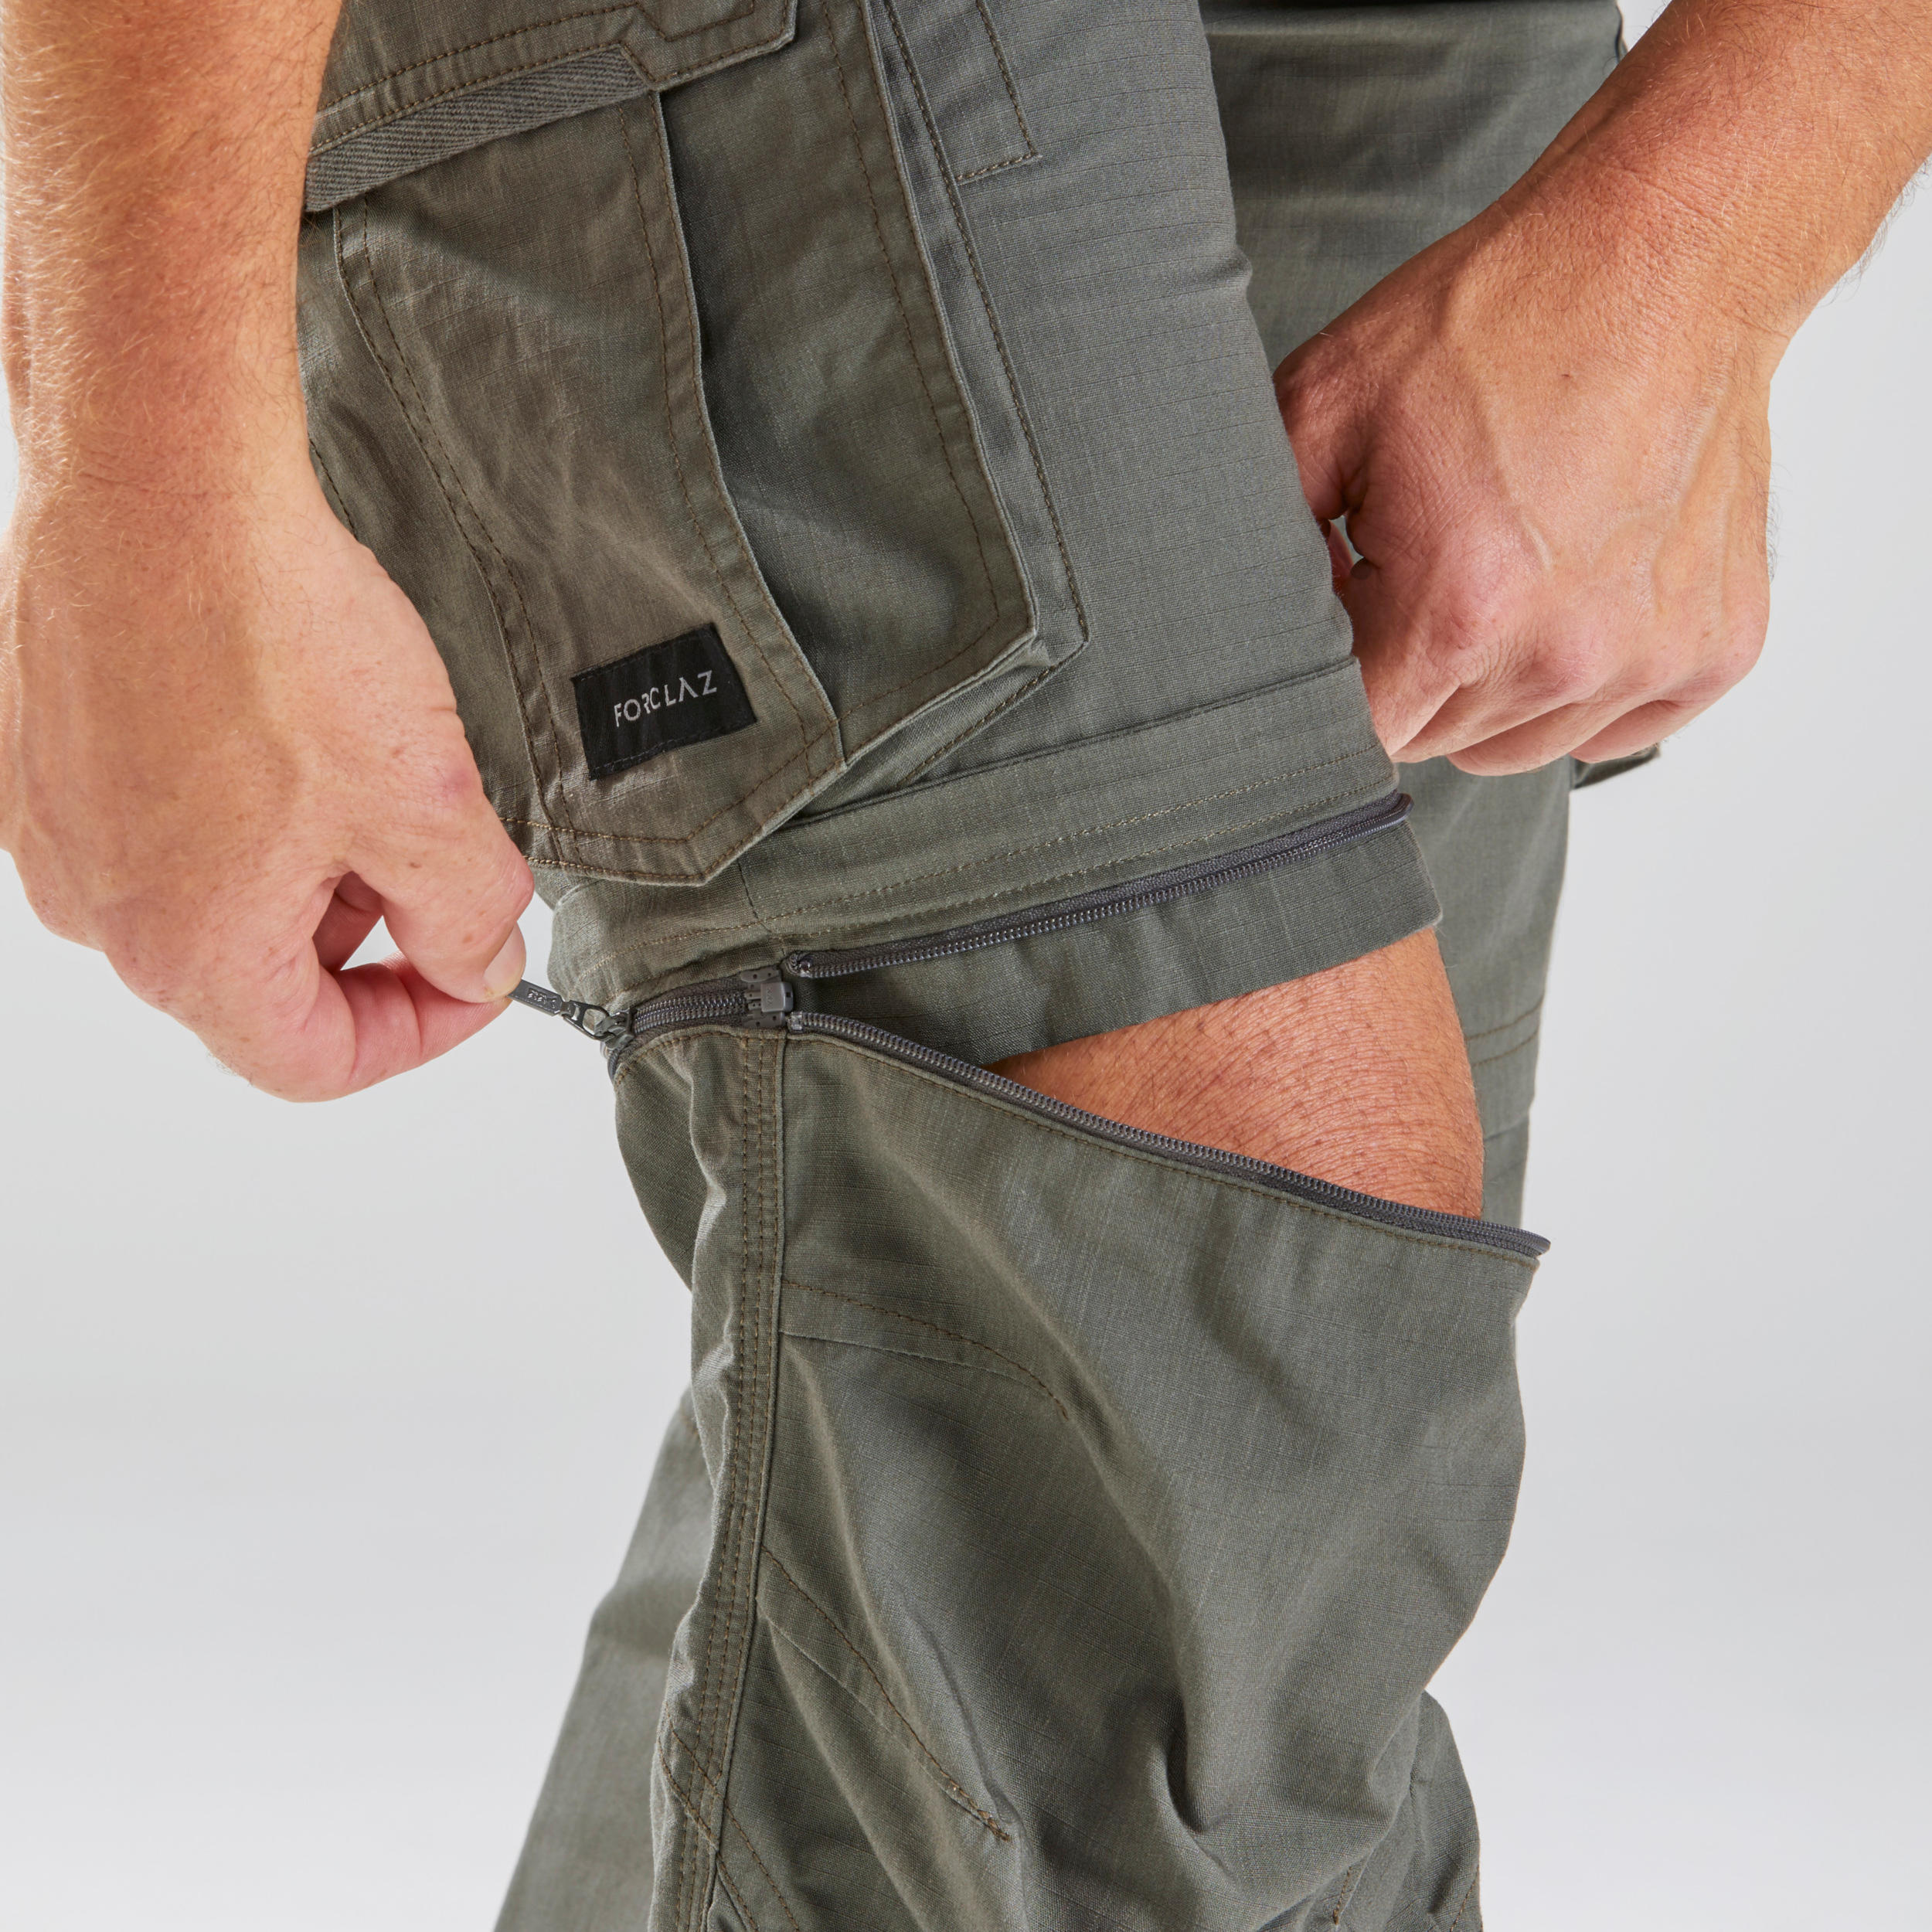 Pin by abc xyz on Cooking basics | Mens travel, Cargo trousers, Decathlon